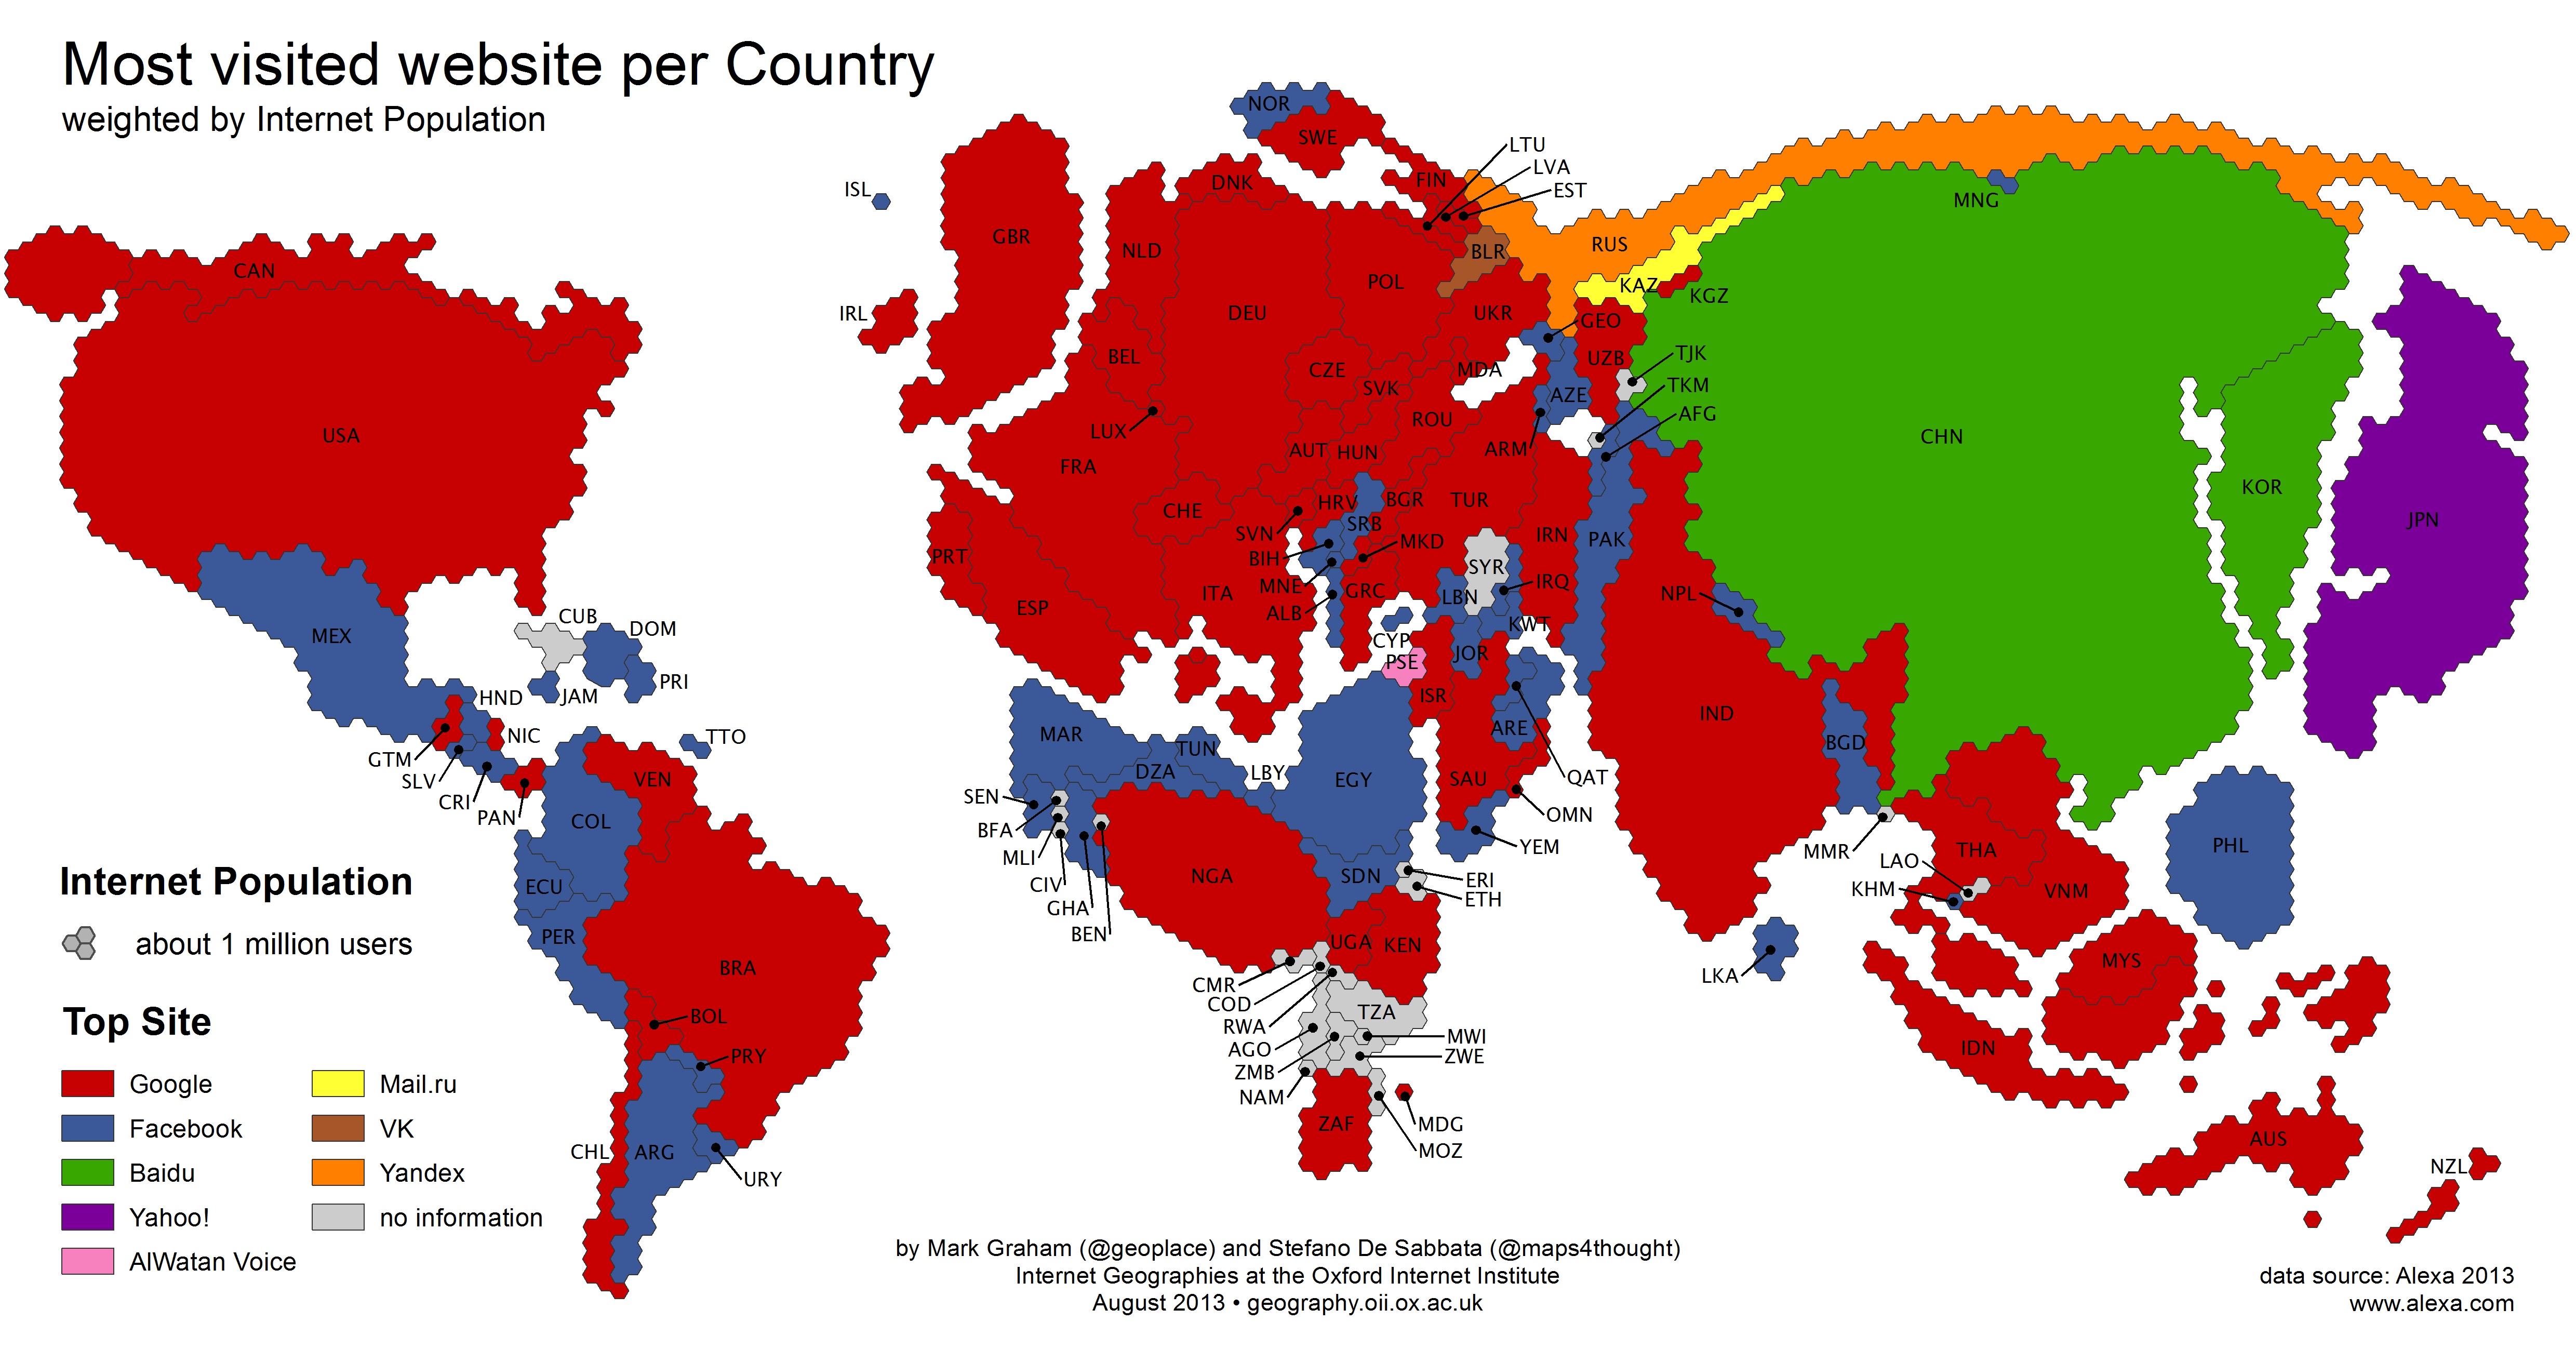 Most visited site by country